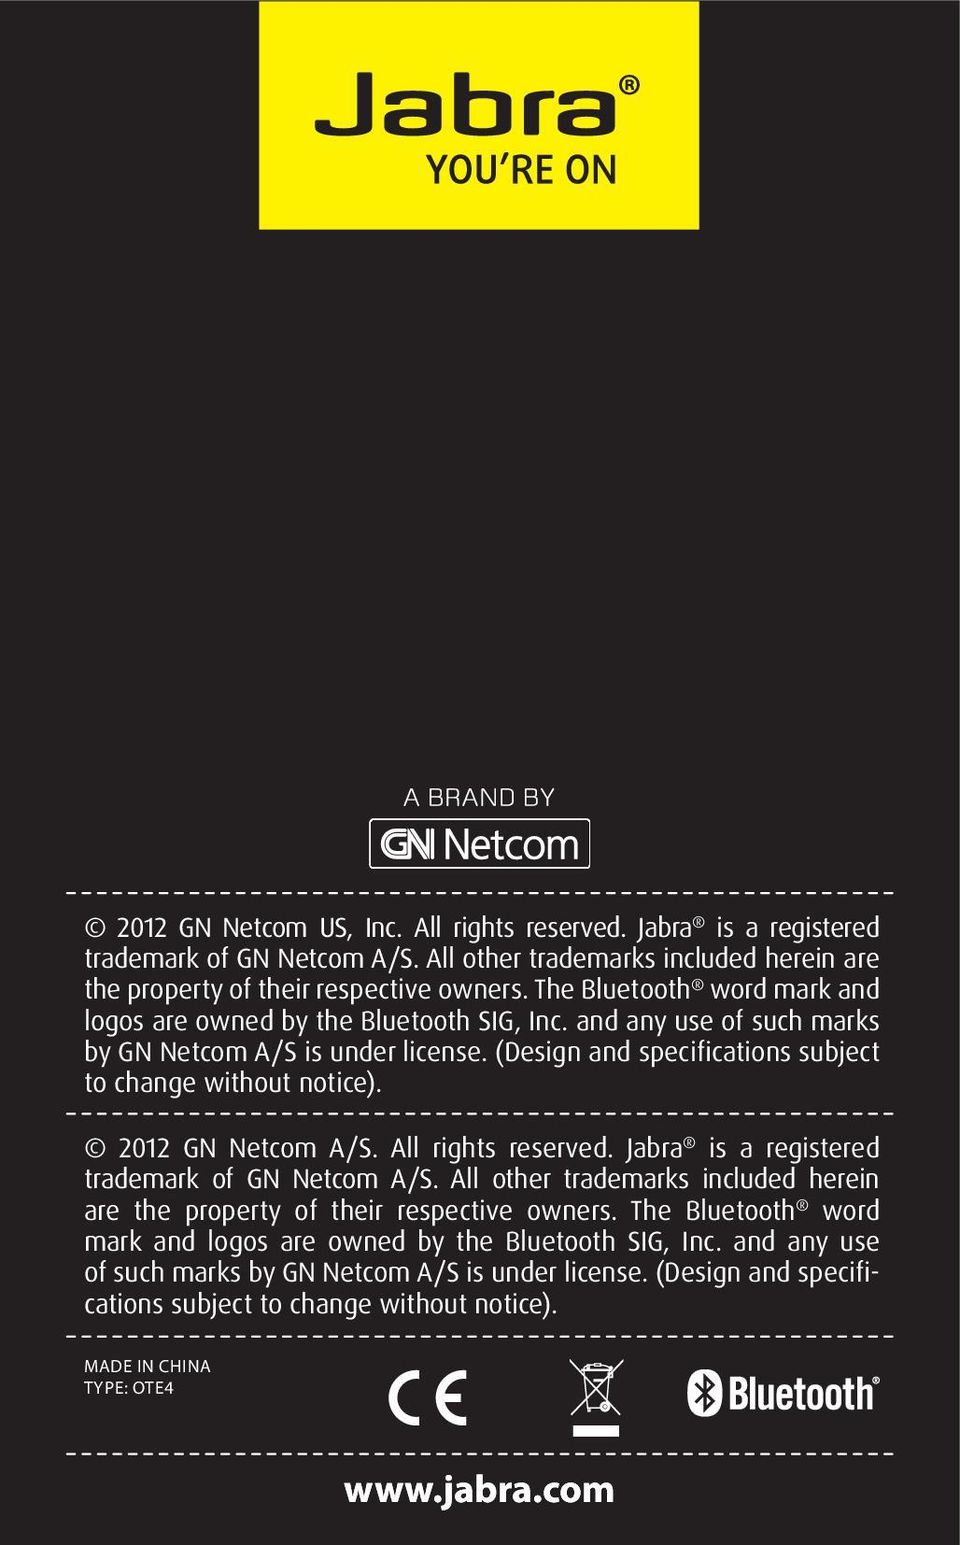 2012 GN Netcom A/S. All rights reserved. Jabra is a registered trademark of GN Netcom A/S. All other trademarks included herein are the property of their respective owners.